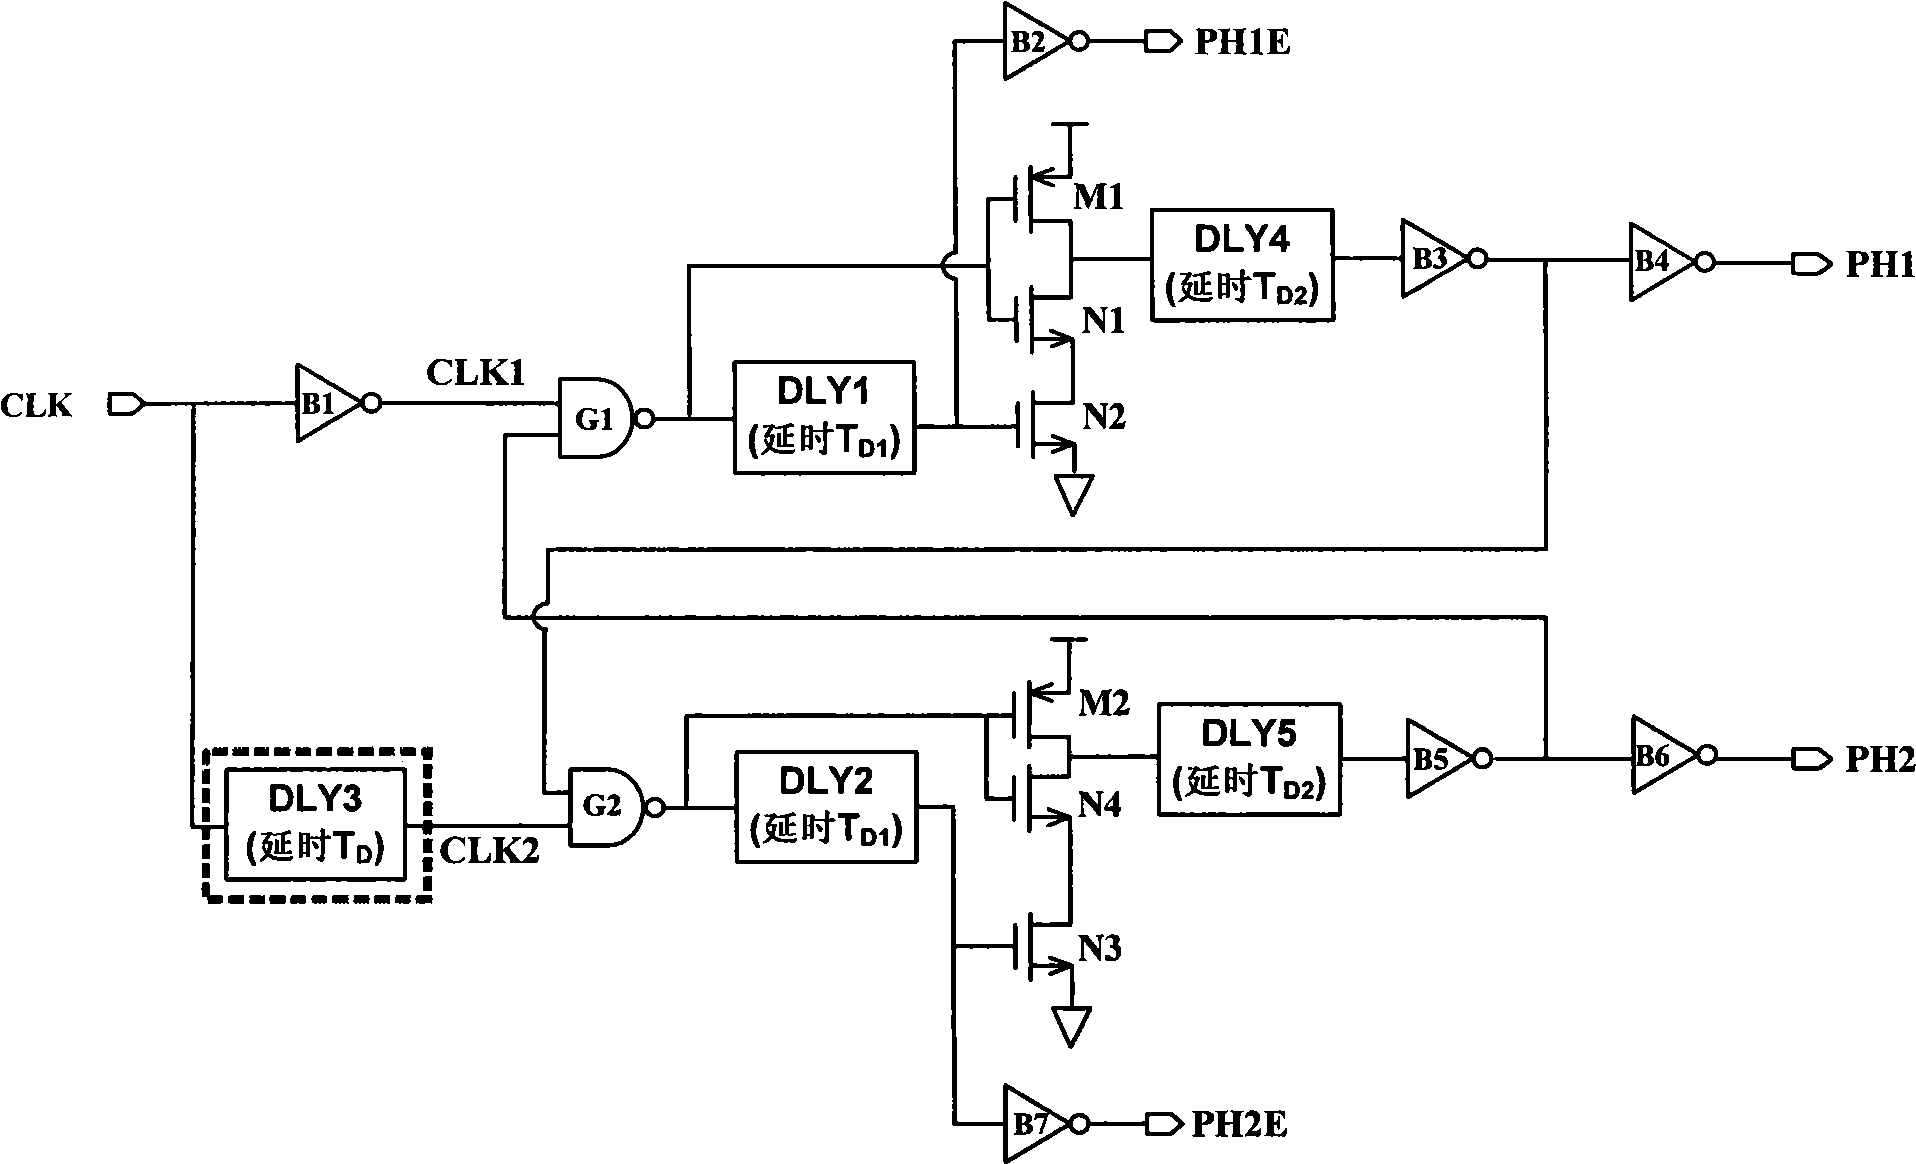 Non-overlapping clock-generating circuit with independently regulated two-phase pulse duration